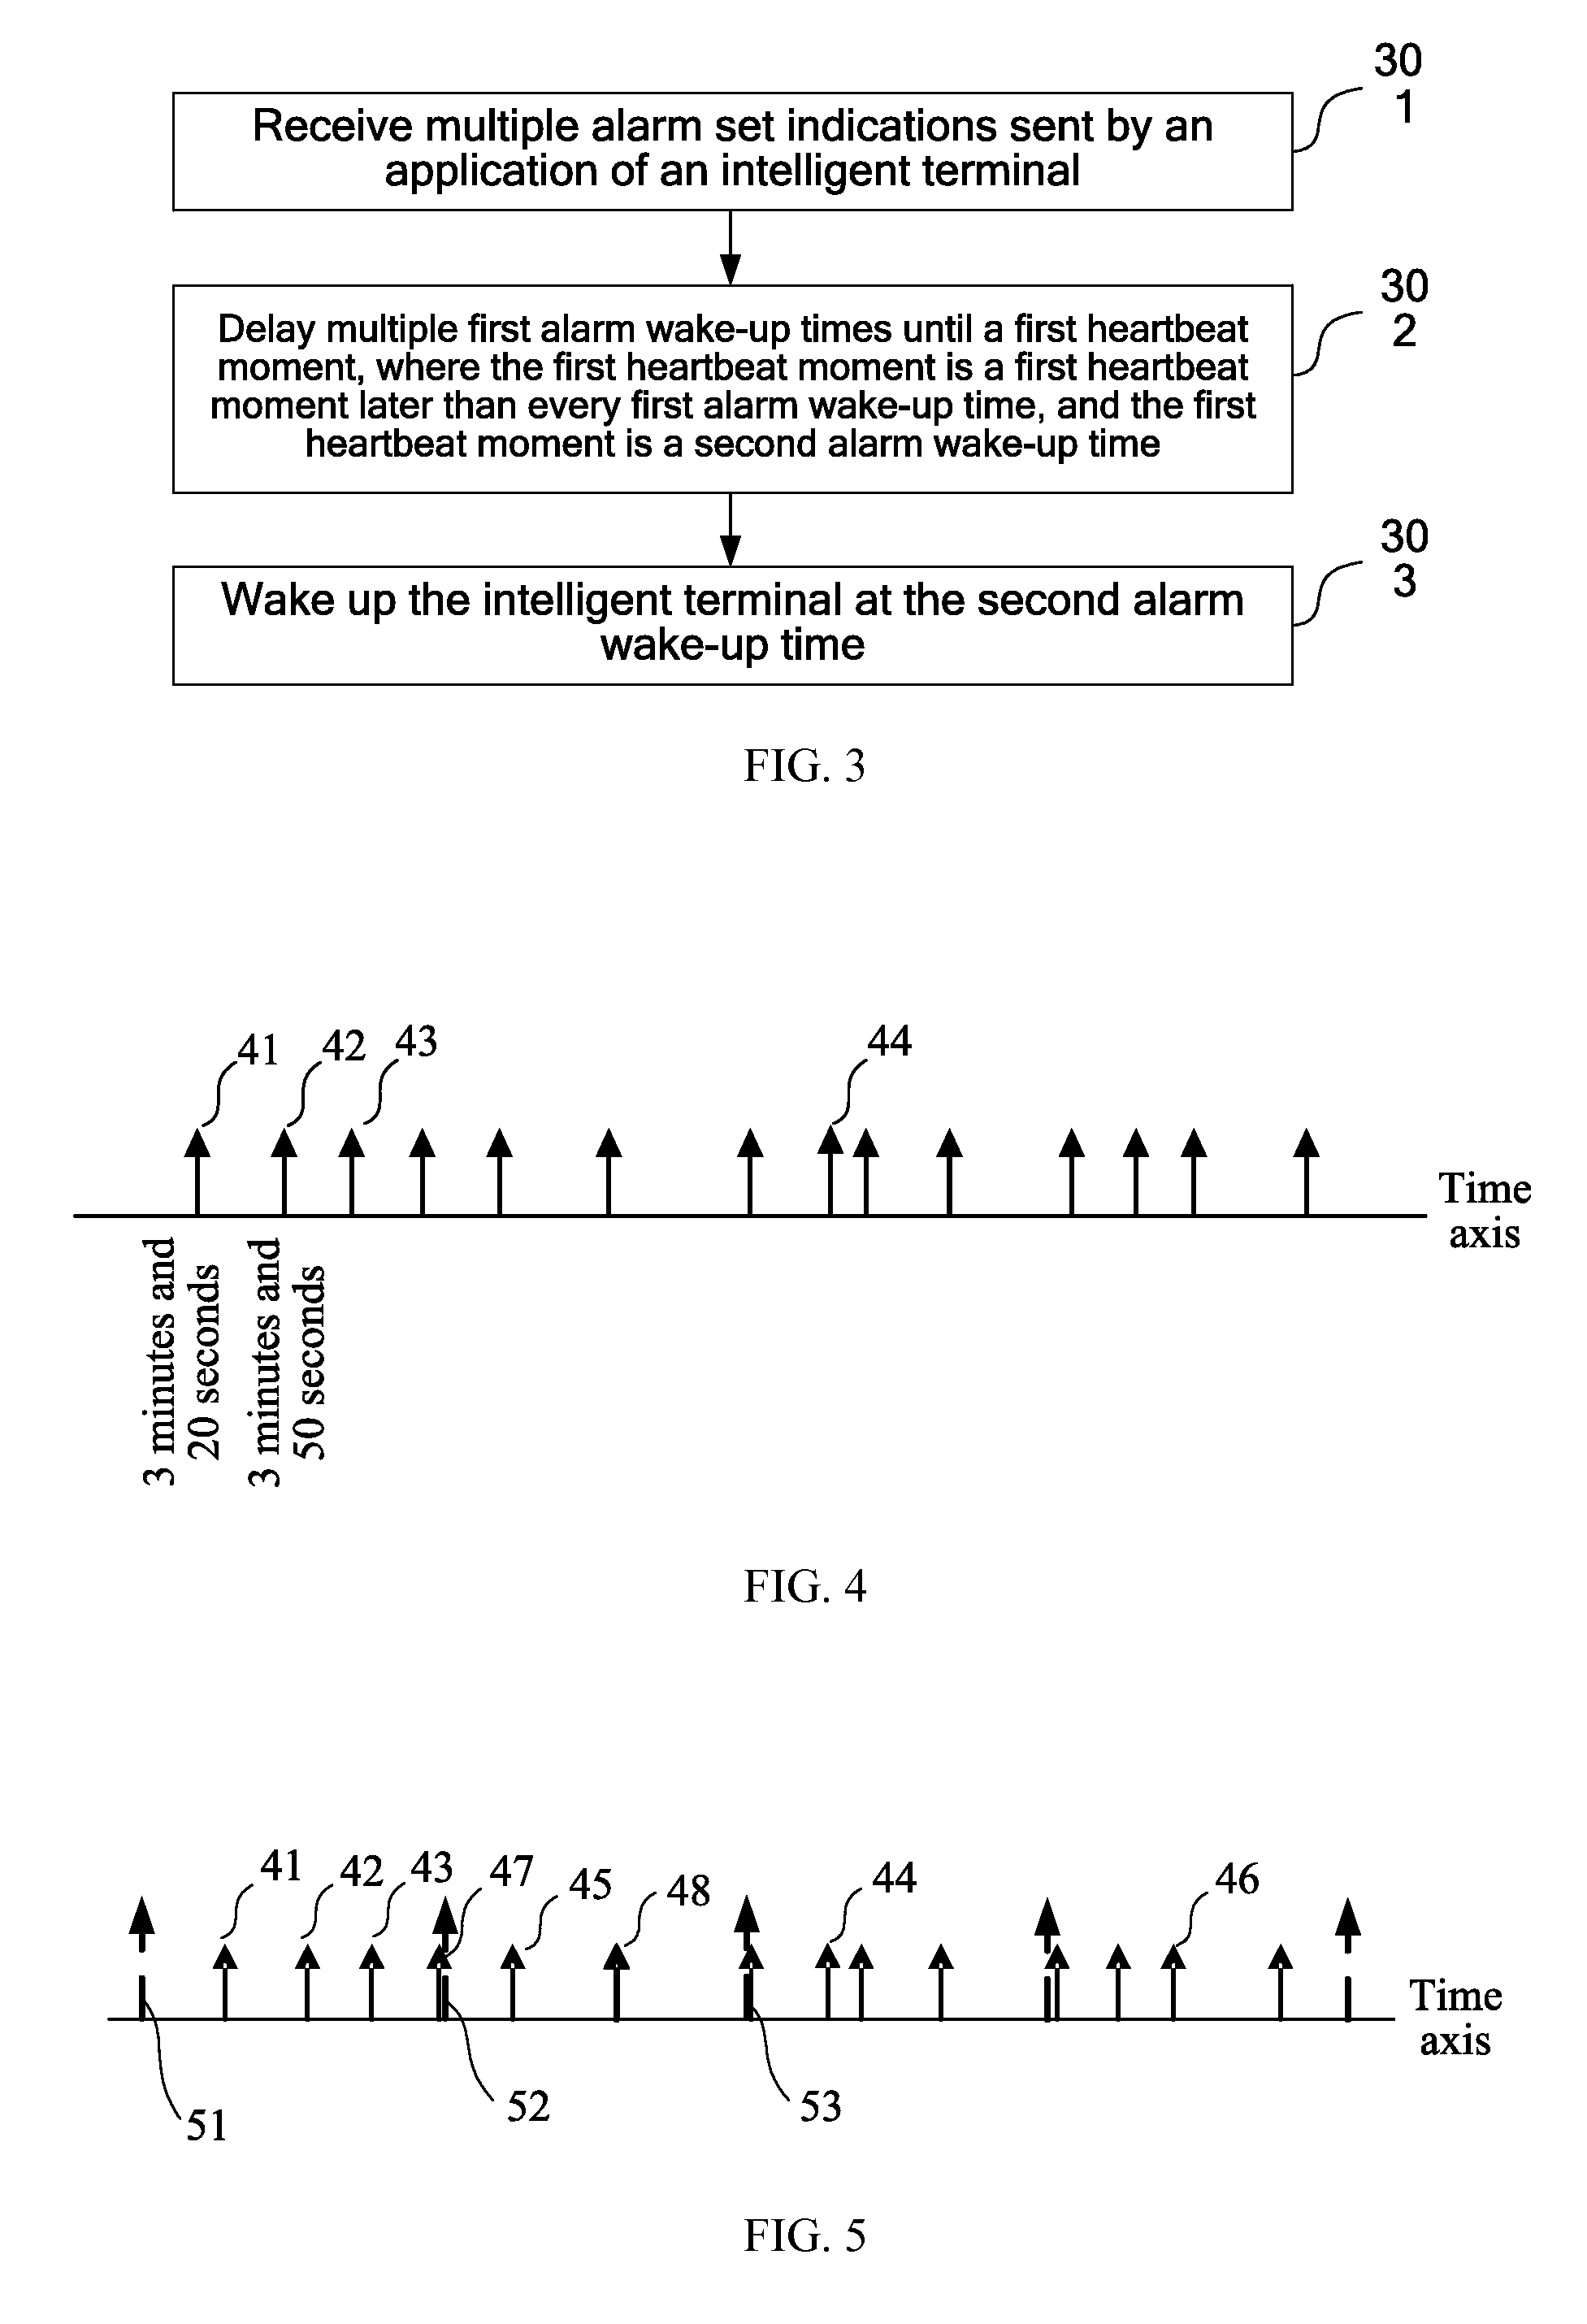 Method and apparatus for wake-up control of intelligent terminal by determining whether to delay wake up times